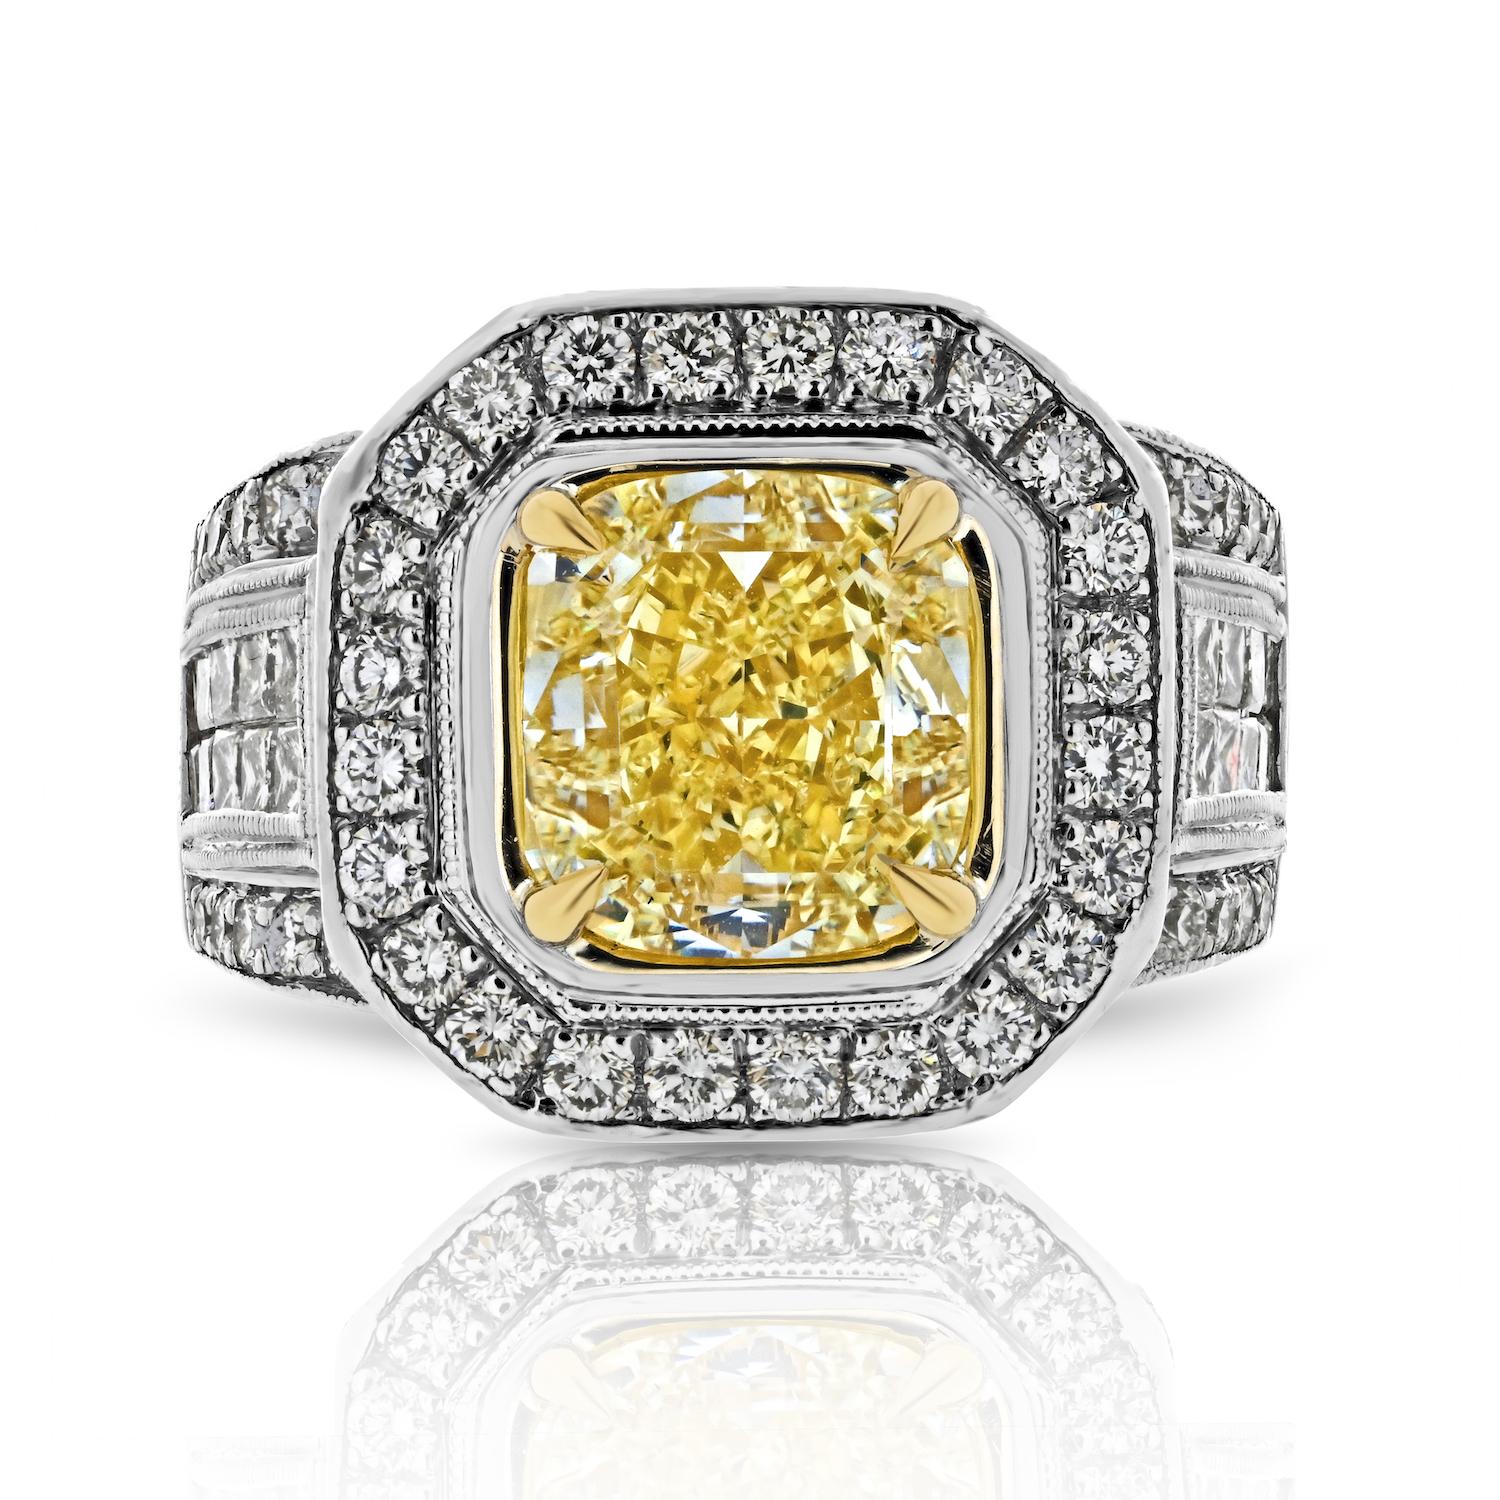 Embrace the allure of this remarkable 3.20ct Fancy Yellow Intense Cushion Cut Diamond Engagement Ring. Gracing the center stage is a splendid 3.20-carat cushion-cut diamond, radiating in the striking Fancy Yellow Intense color, and exhibiting